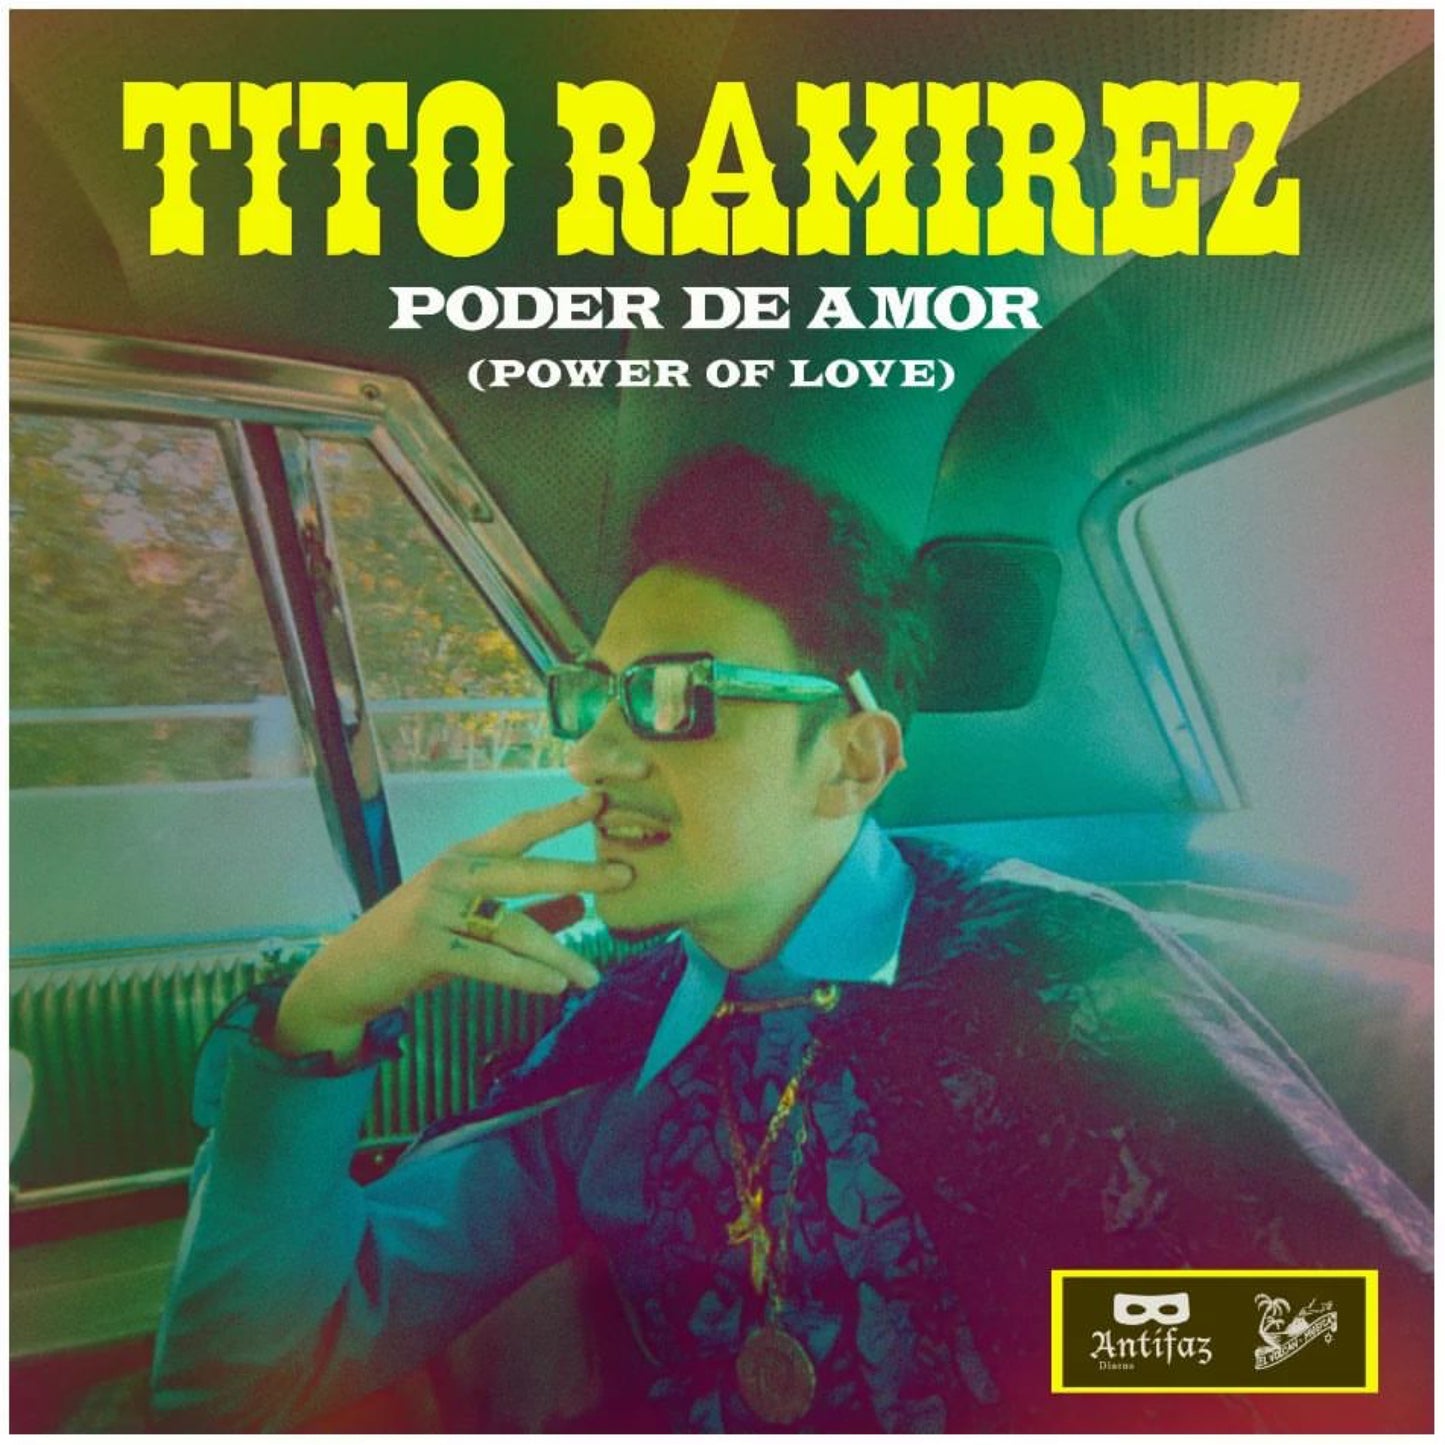 Tito Ramírez "Have To See Ma Babe / Power of Love” 45